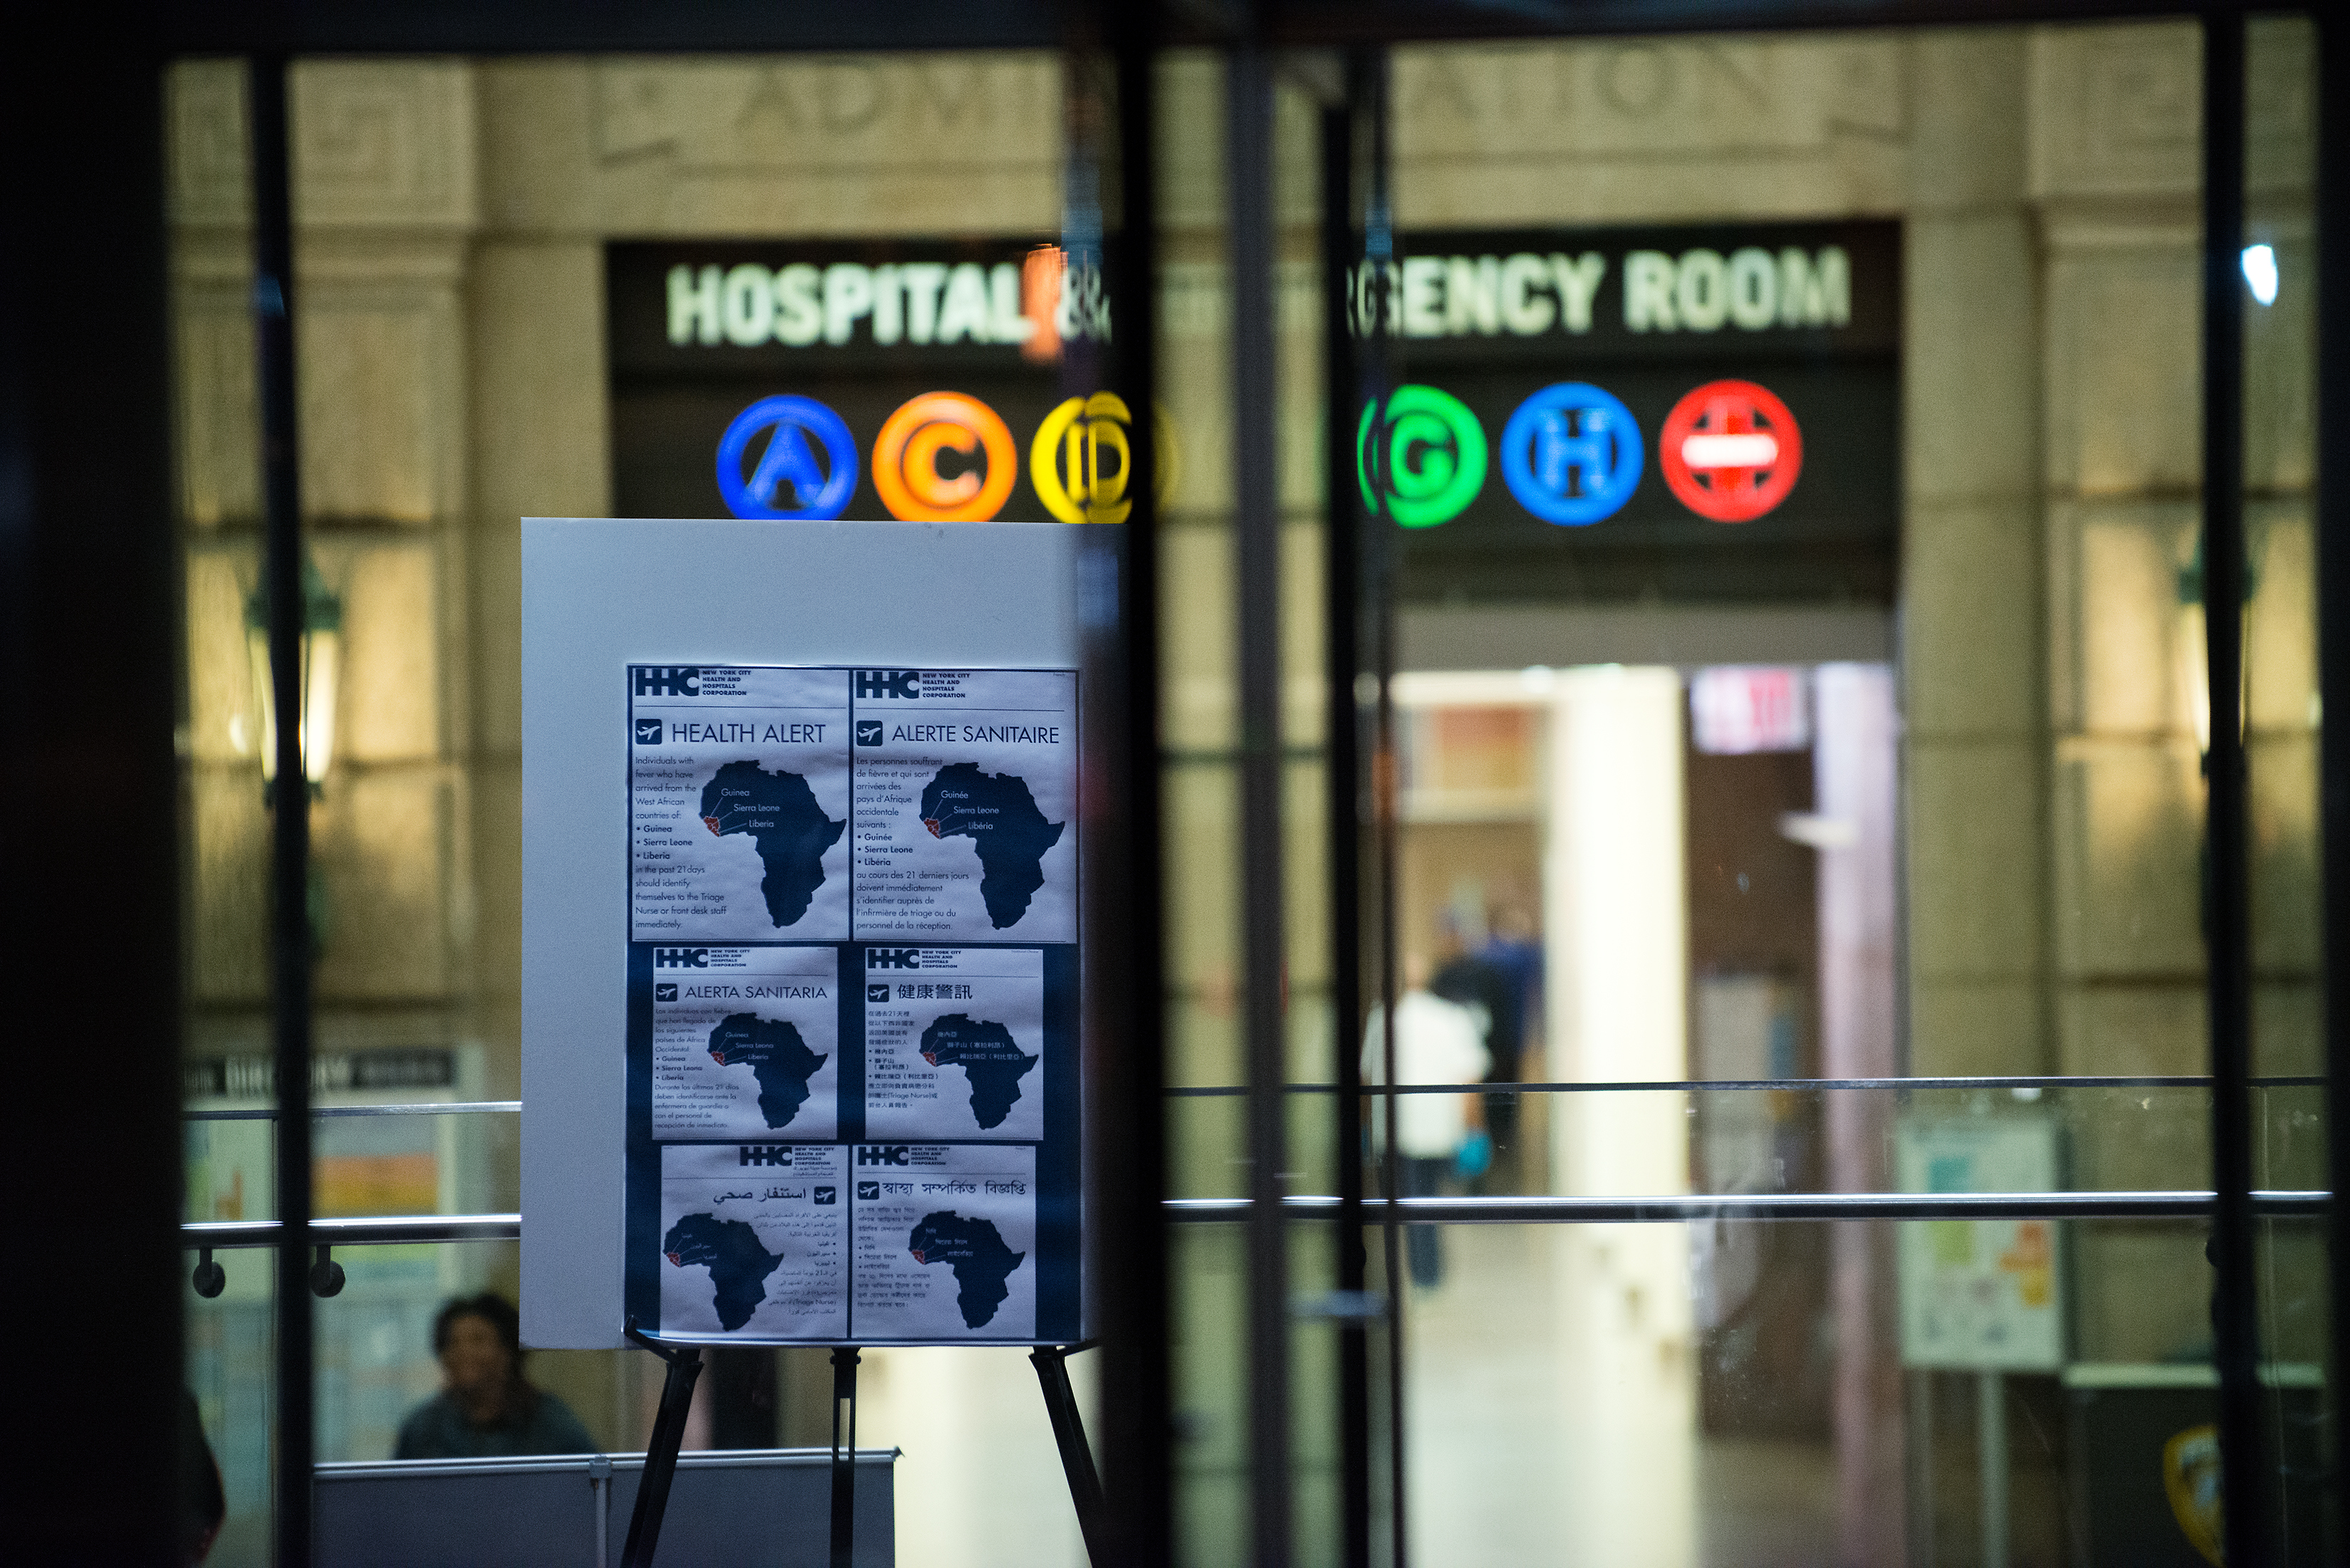 A health alert is displayed at the entrance to Bellevue Hospital October 23, 2014 in New York City. (Bryan Thomas—Getty Images)